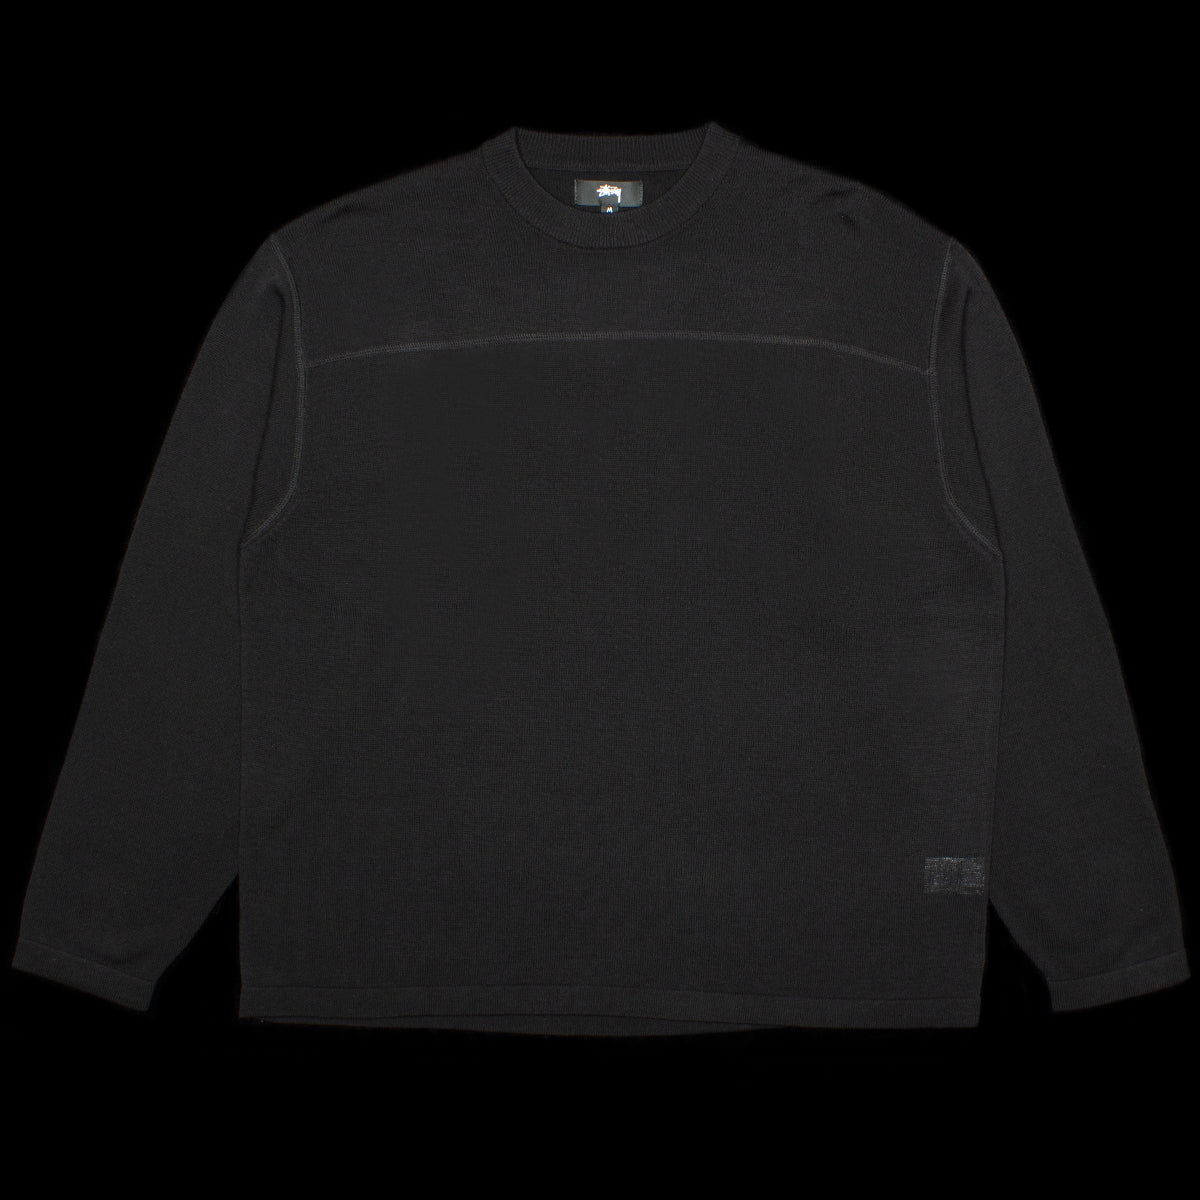 Stussy | Football Sweater Style # 117181 Color : Black